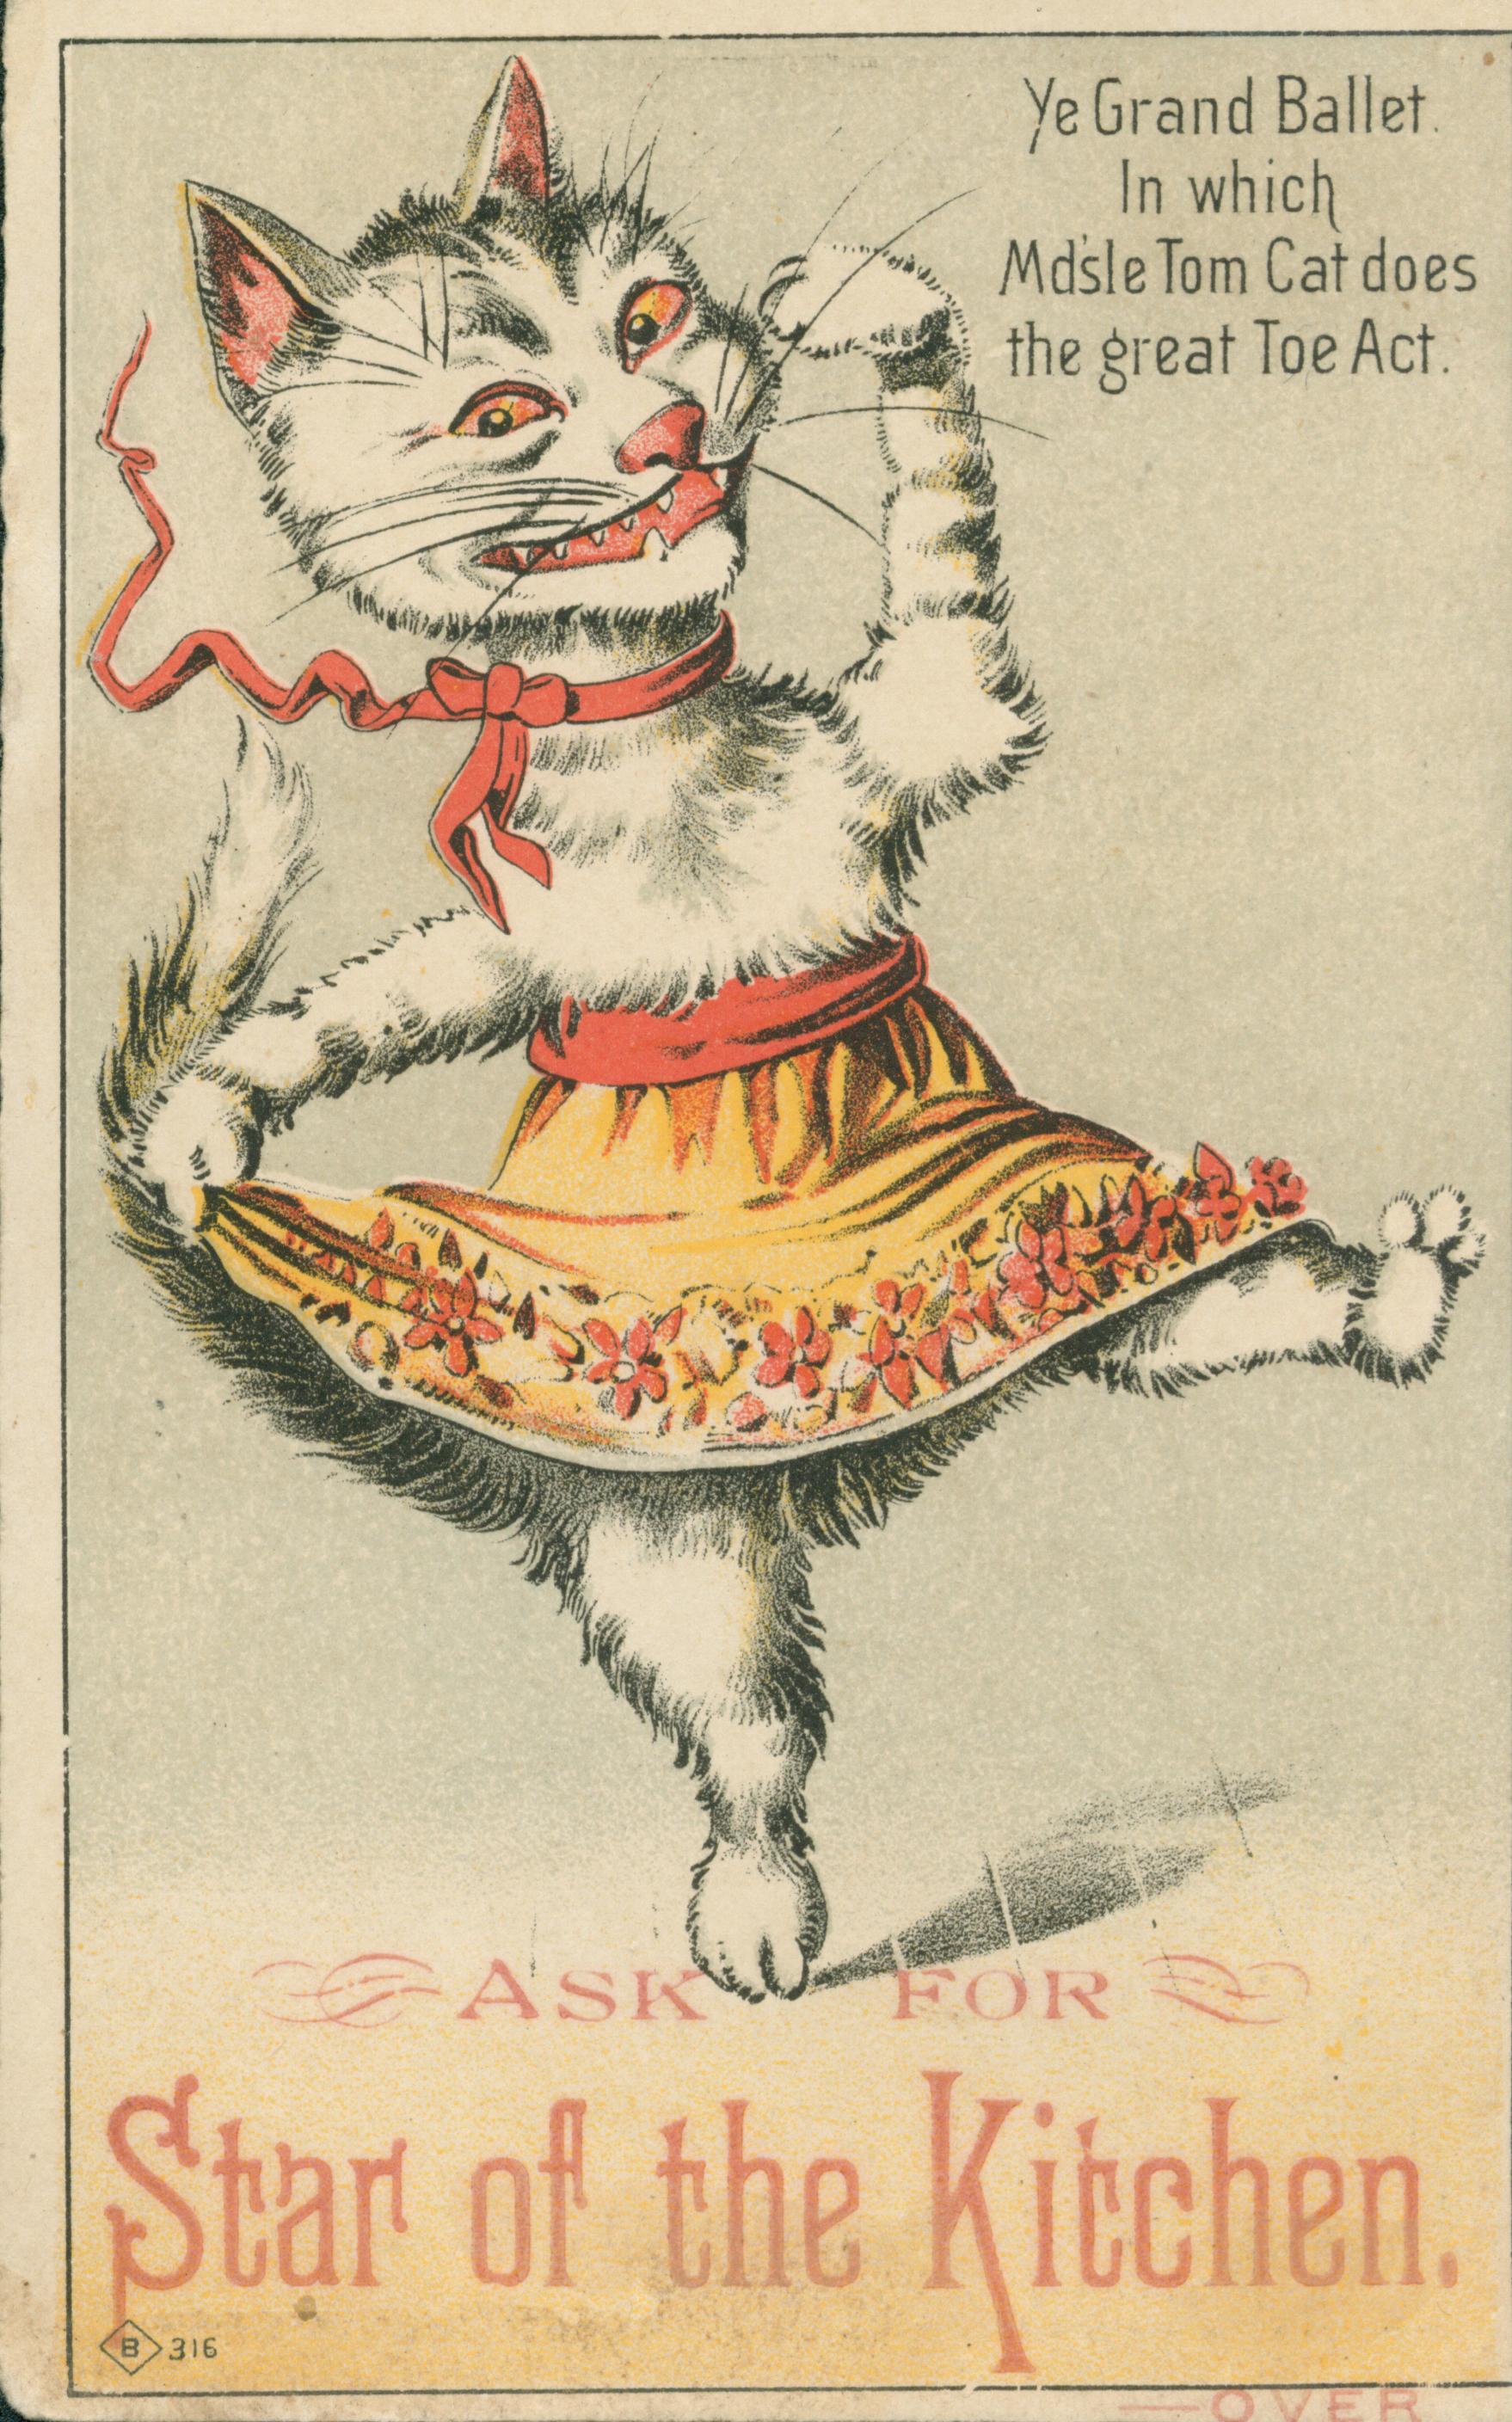 Shows a cat dancing in a skirt